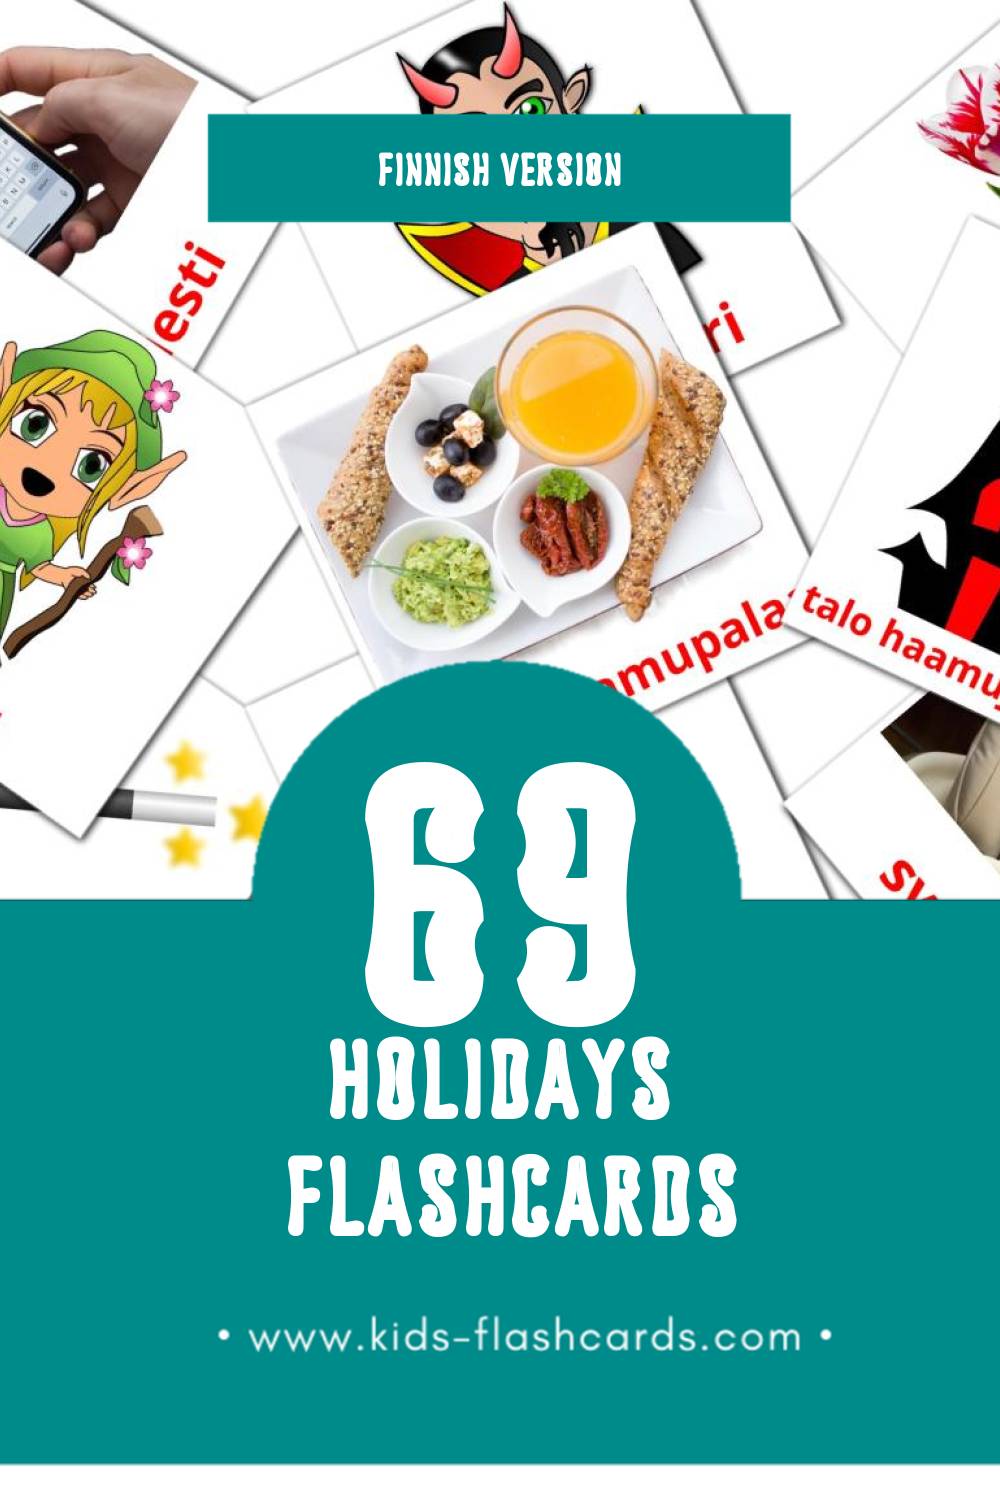 Visual Lomat Flashcards for Toddlers (25 cards in Finnish)